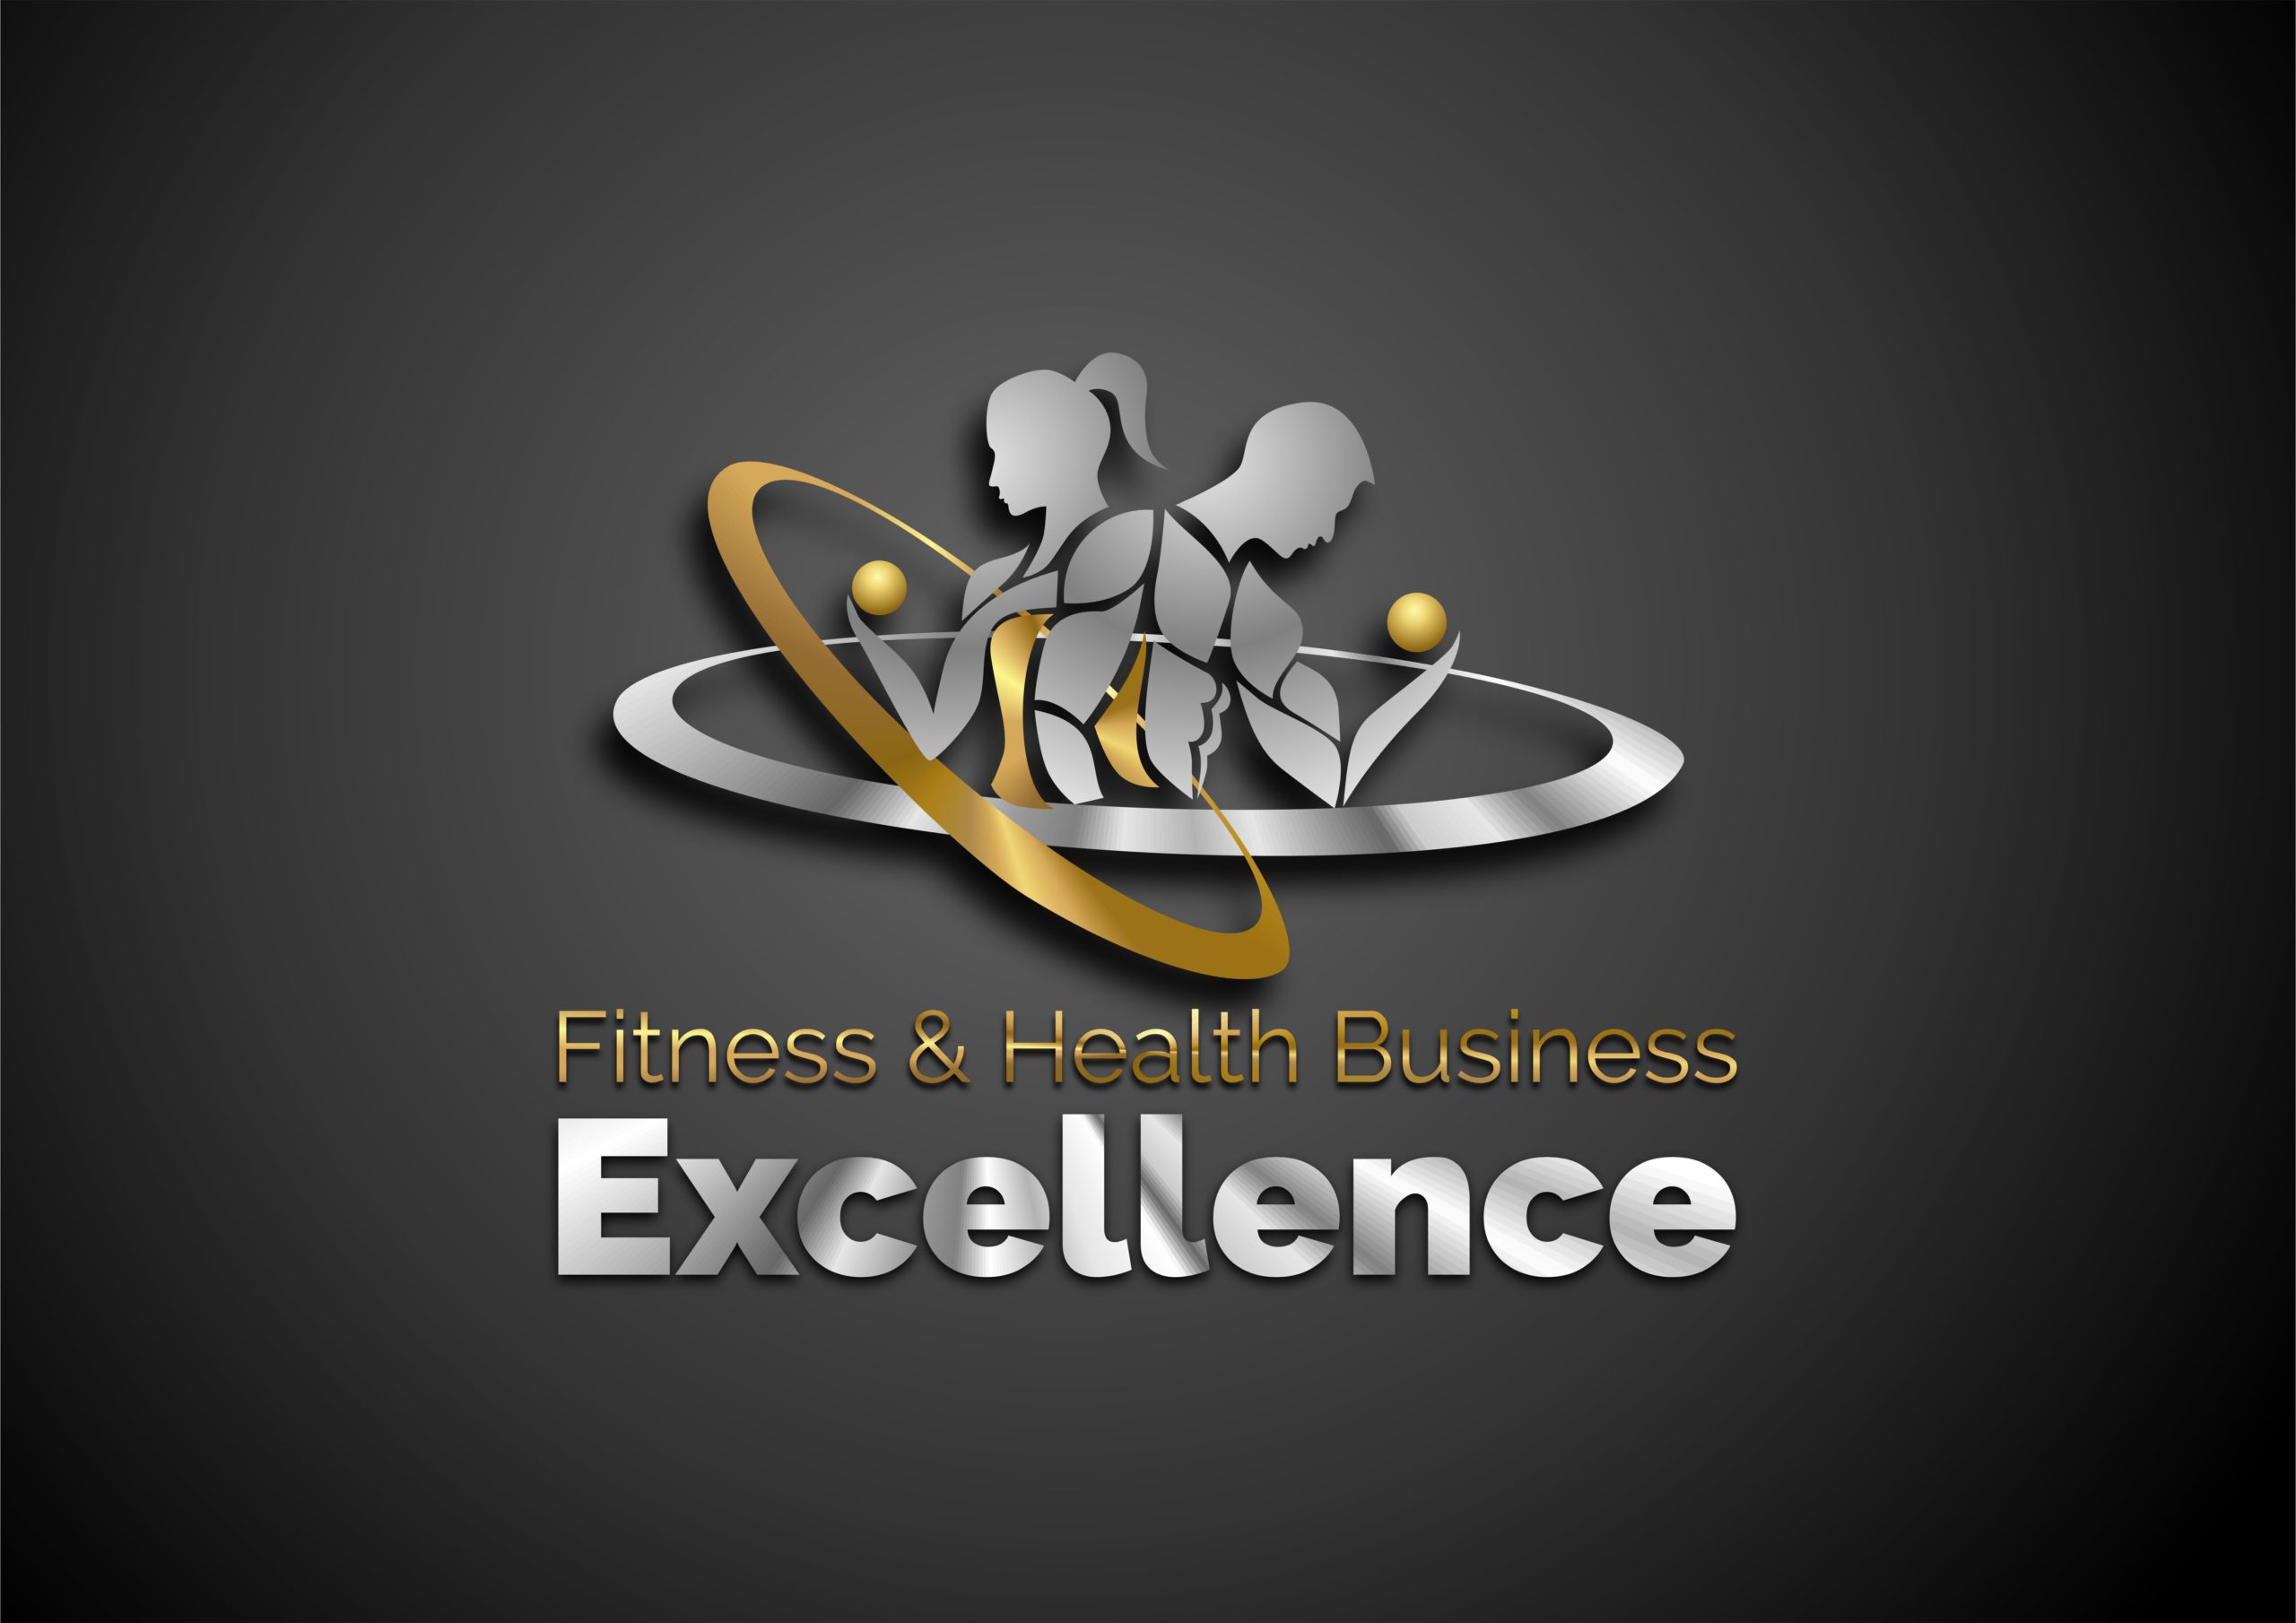 Fitness & Health Business Excellence